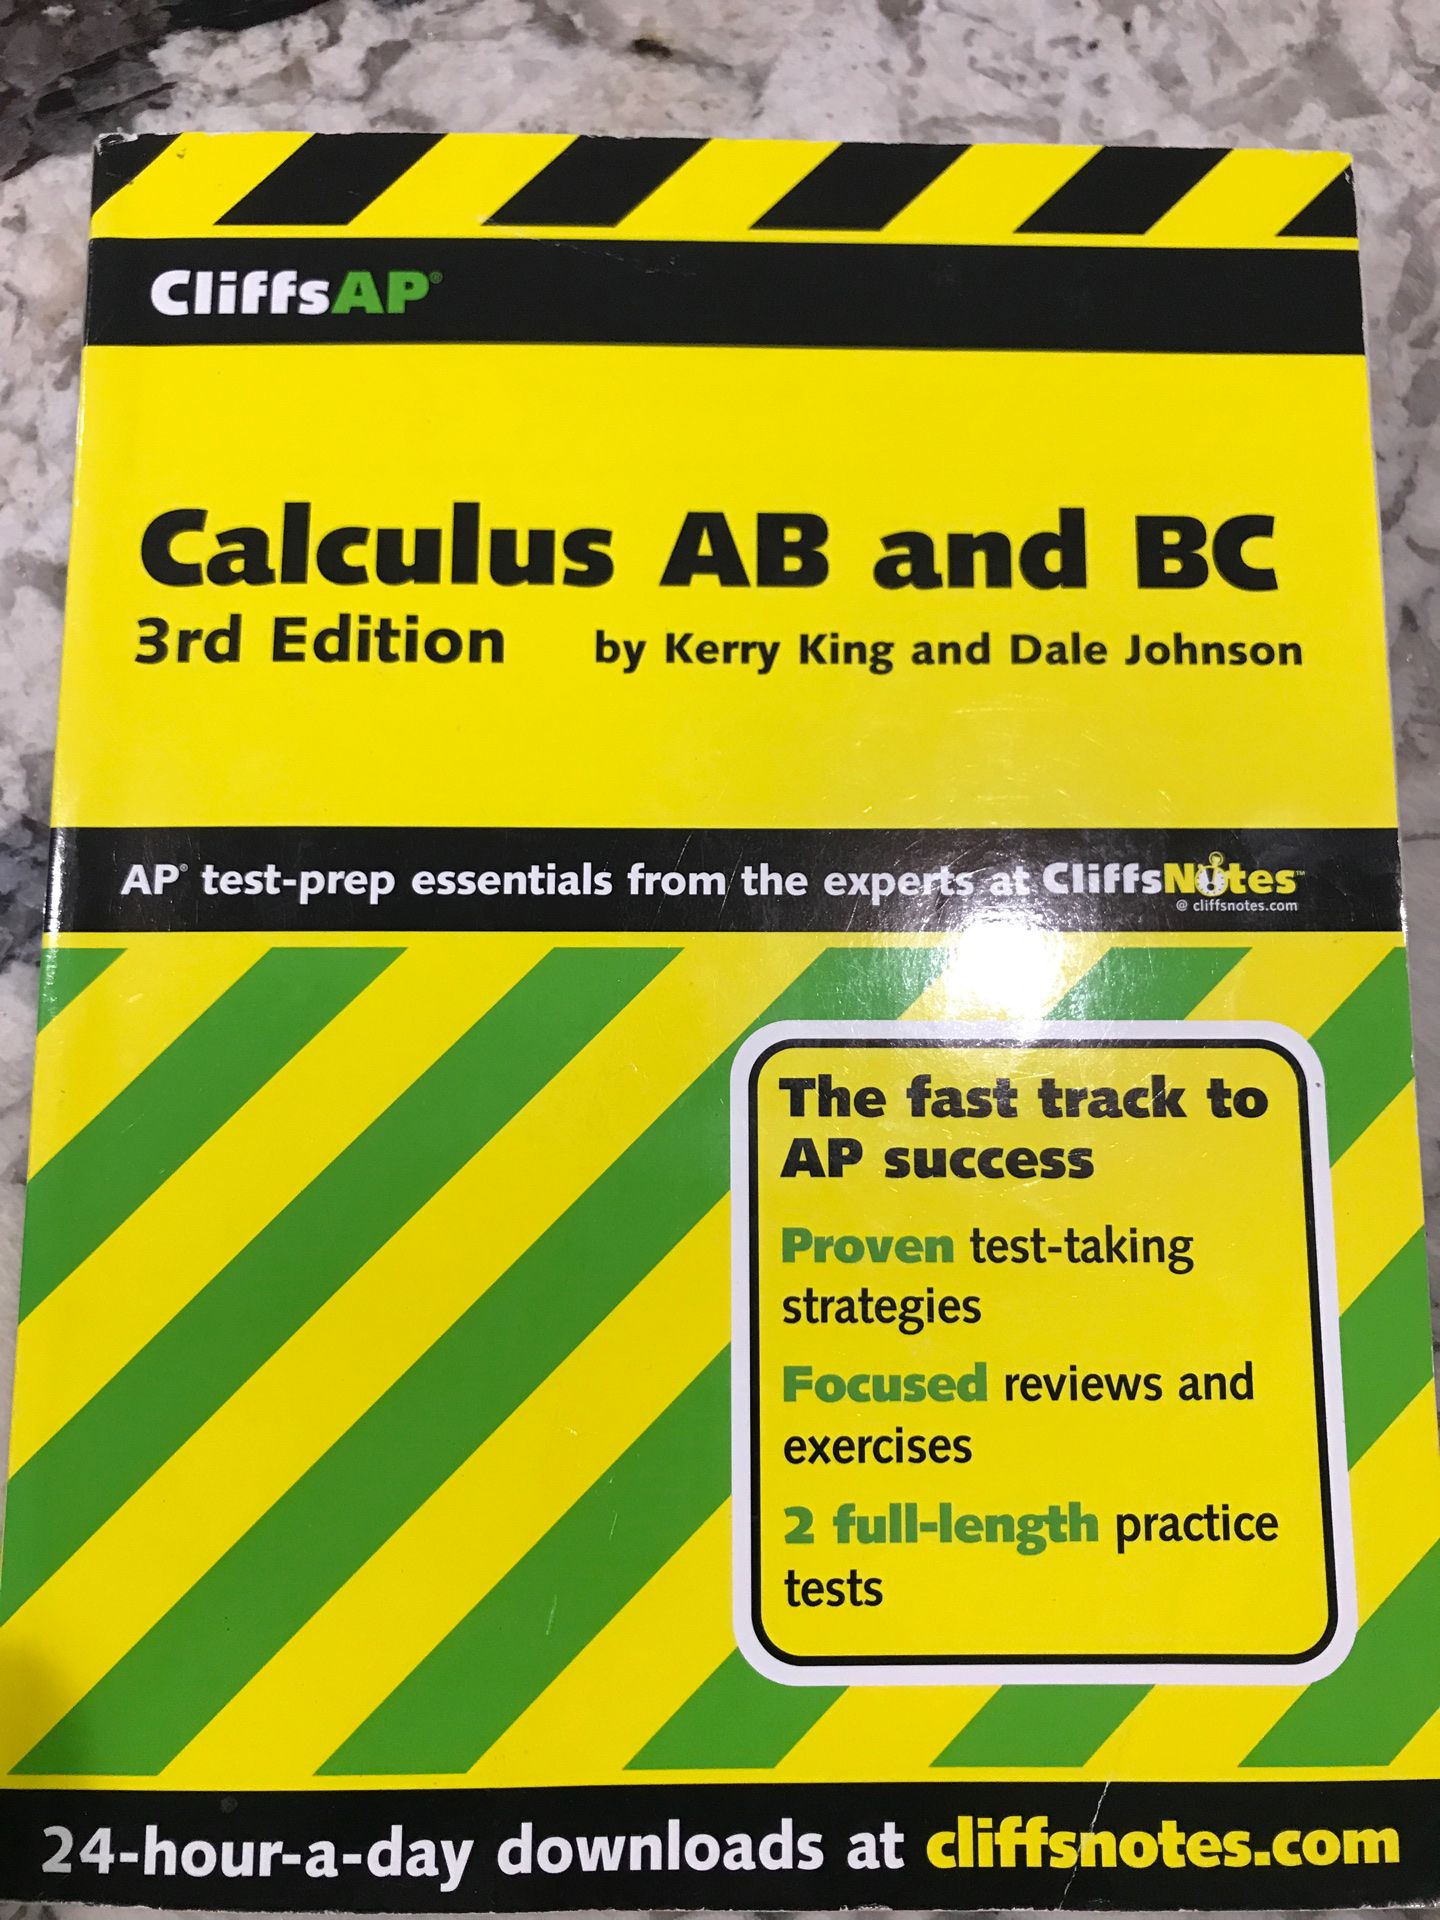 CliffsAP Calculus AB and BC, 3rd Edition